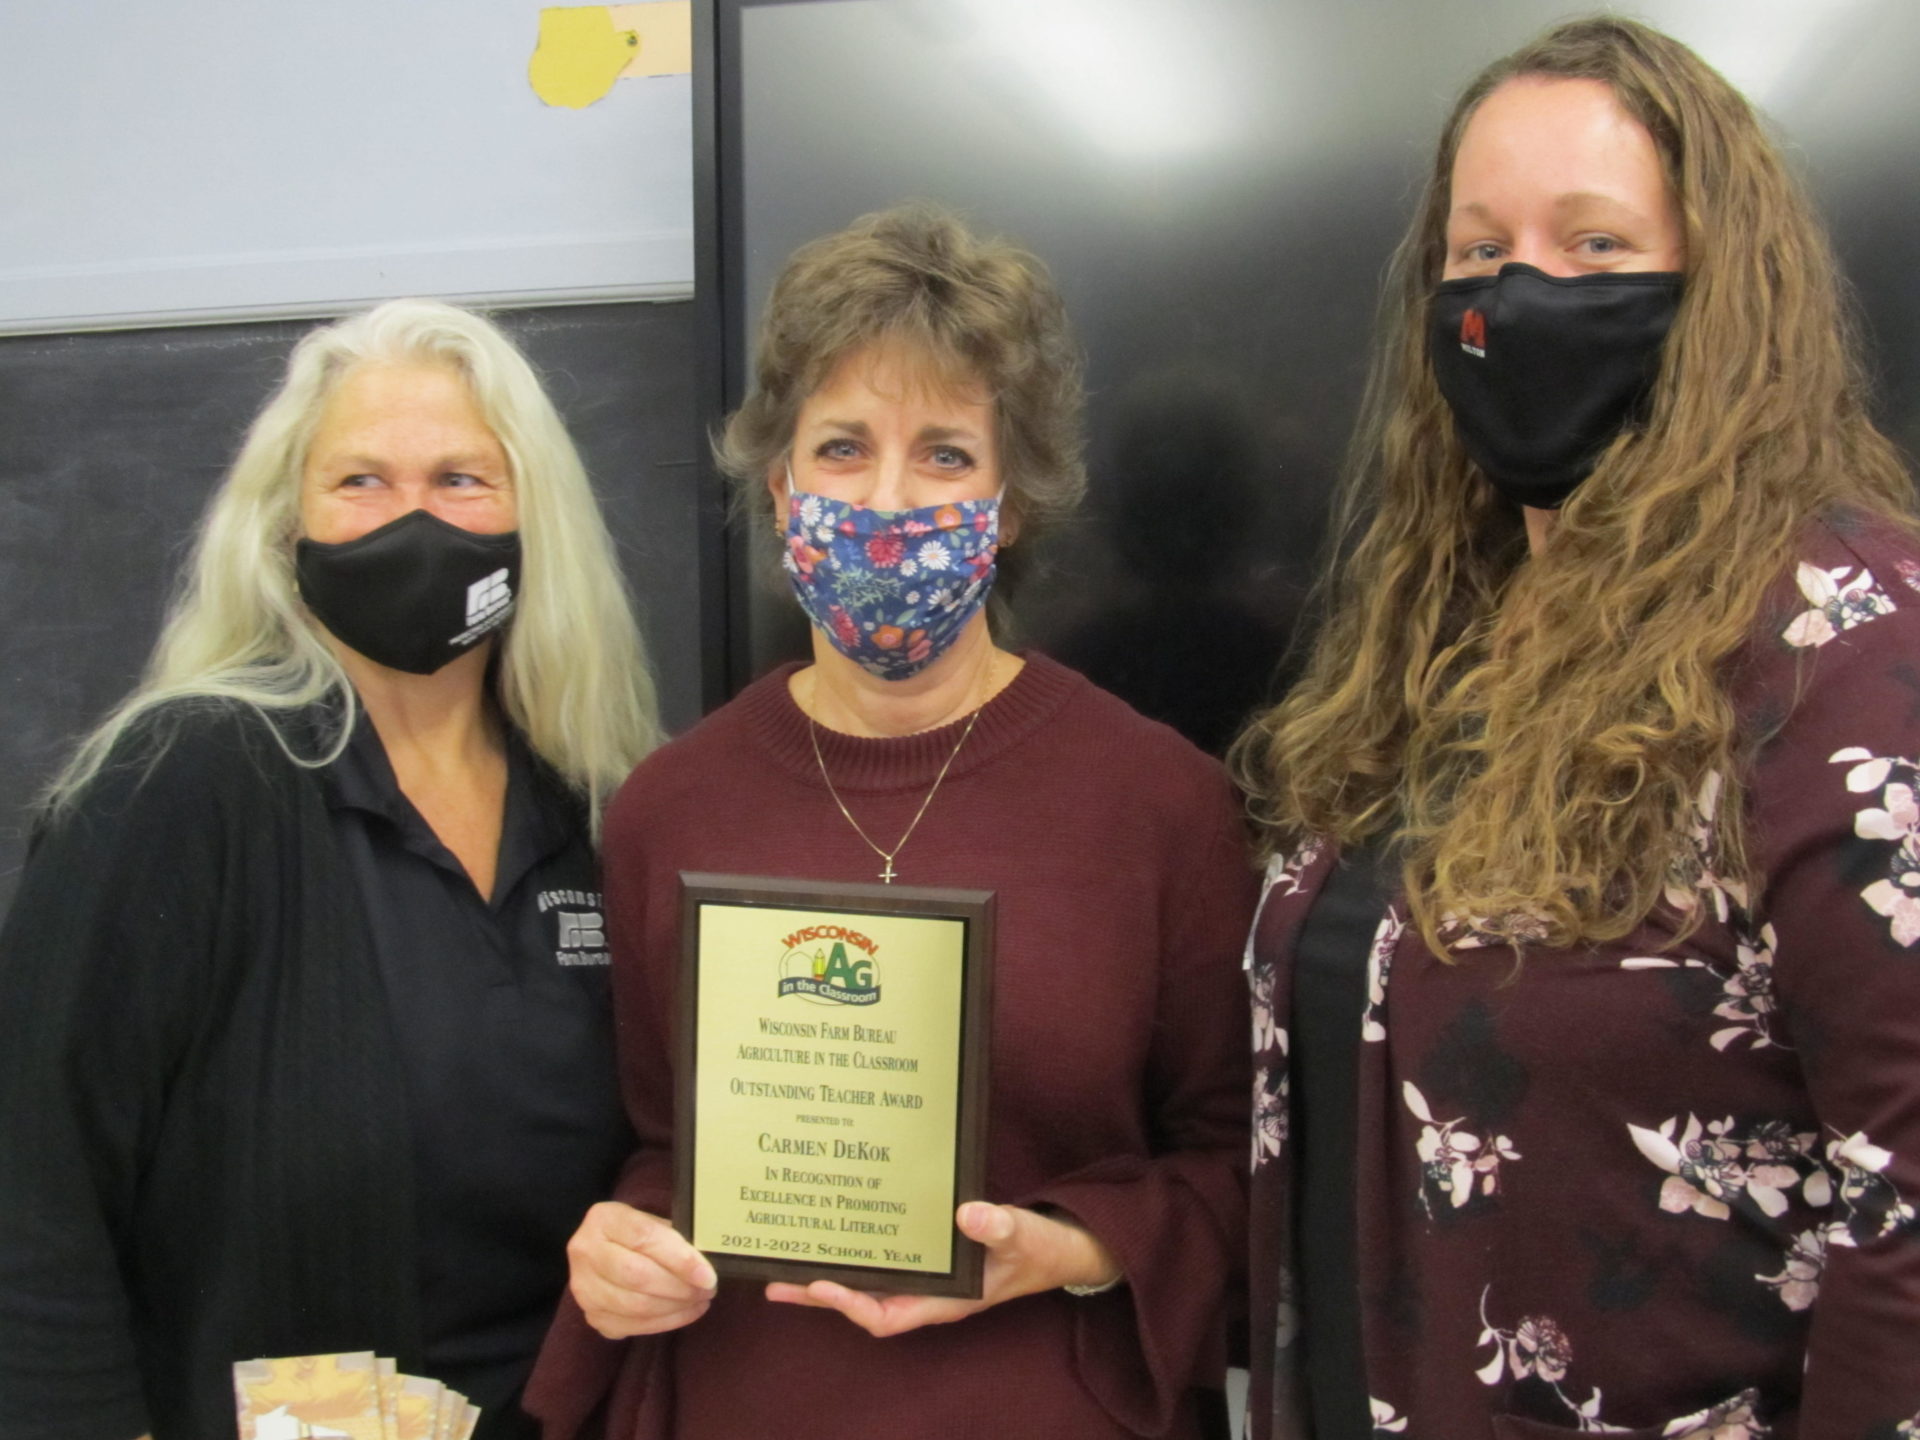 Carmen DeKok (center) was with Wisconsin Farm Bureau’s Ag in the Classroom program’s Outstanding Teacher of the Year Award by Rock County Ag in the Classroom Committee members Sheila Everhart (left) and Stacy Skemp (right).